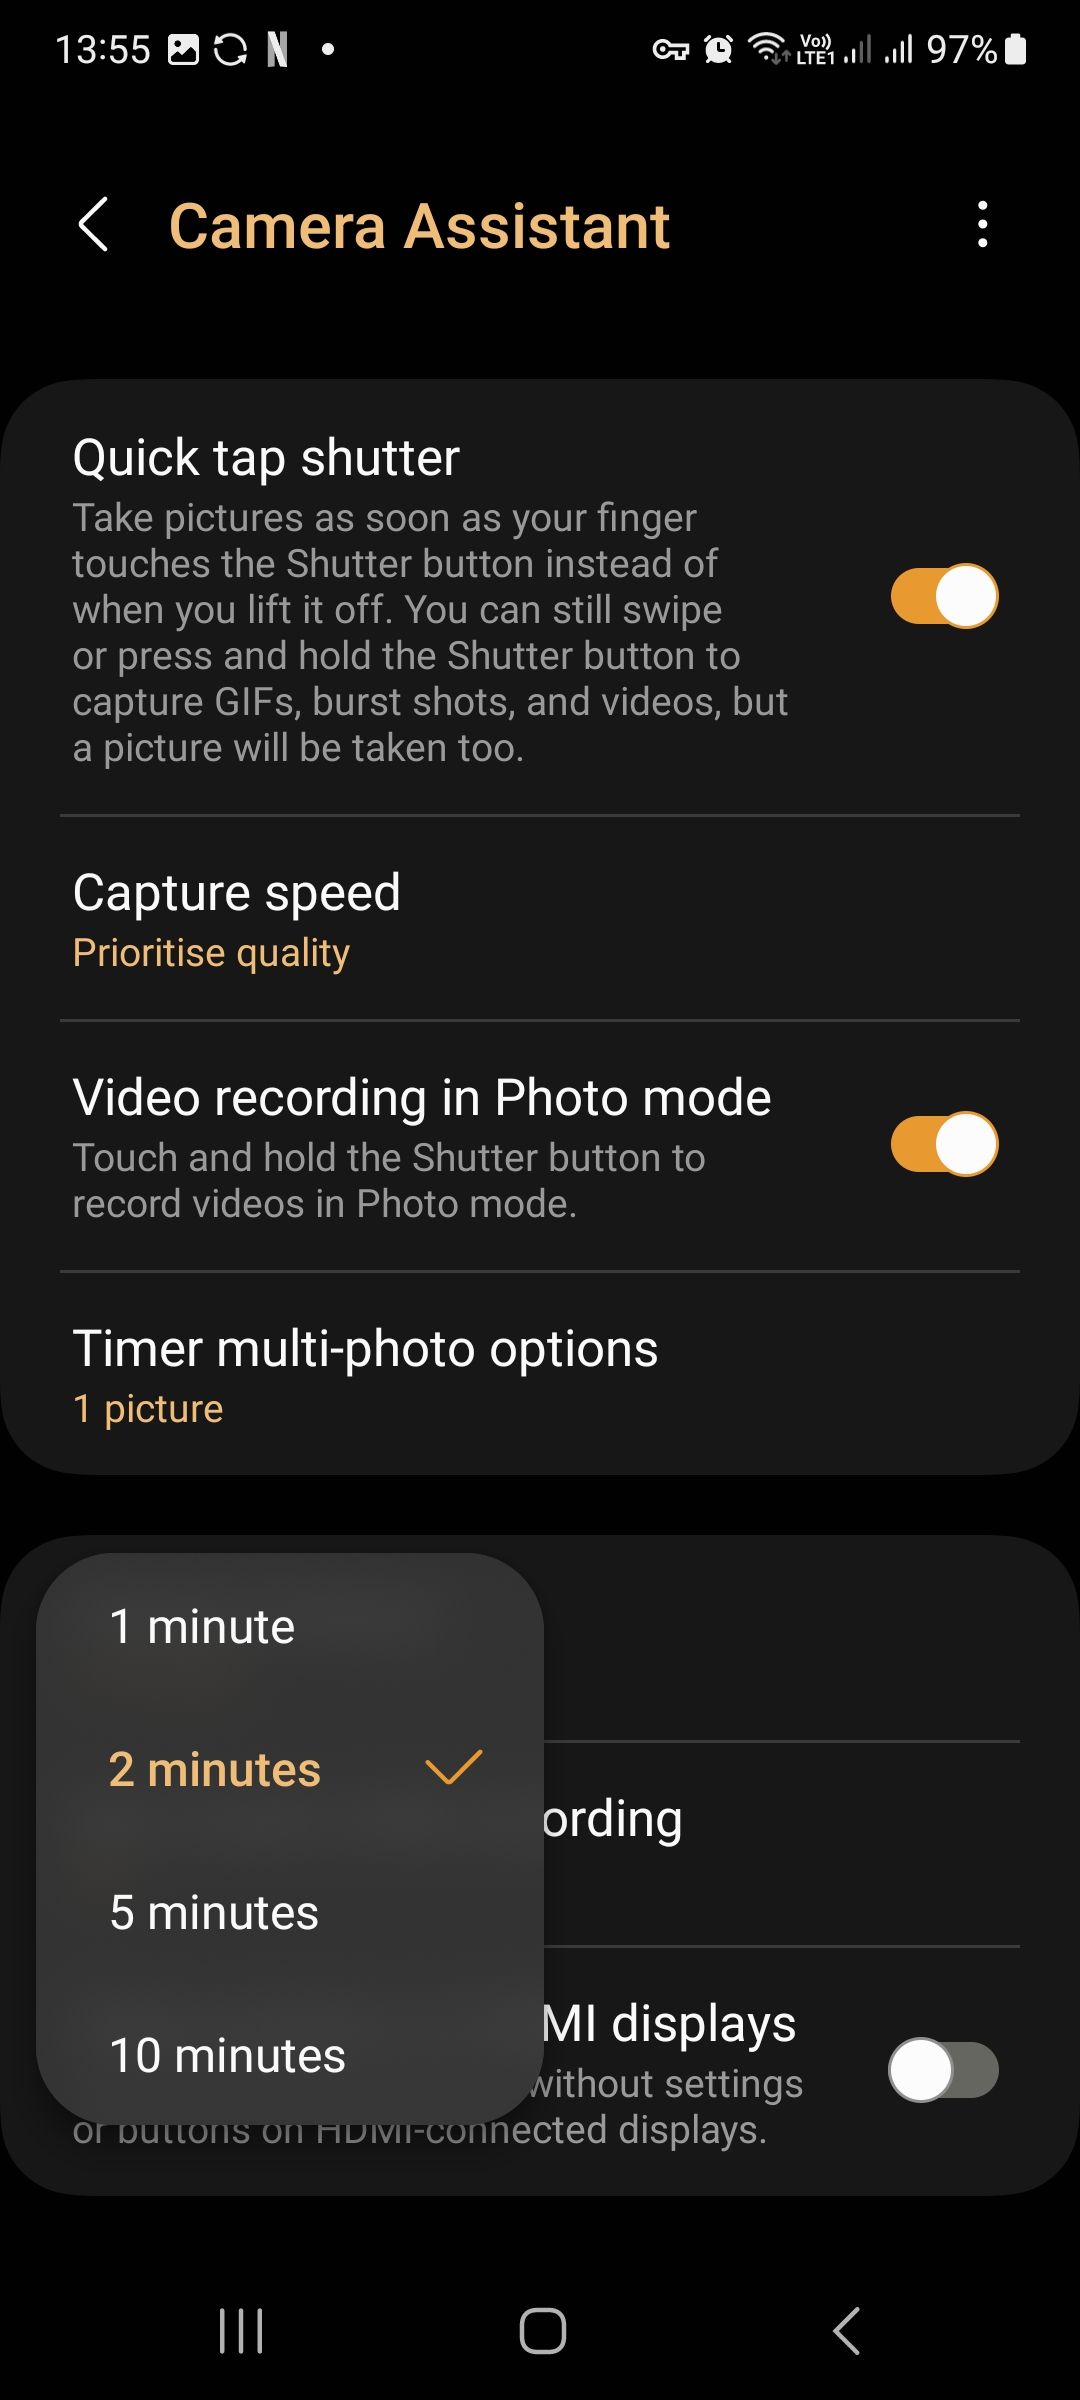 changing camera assistant timeout interval